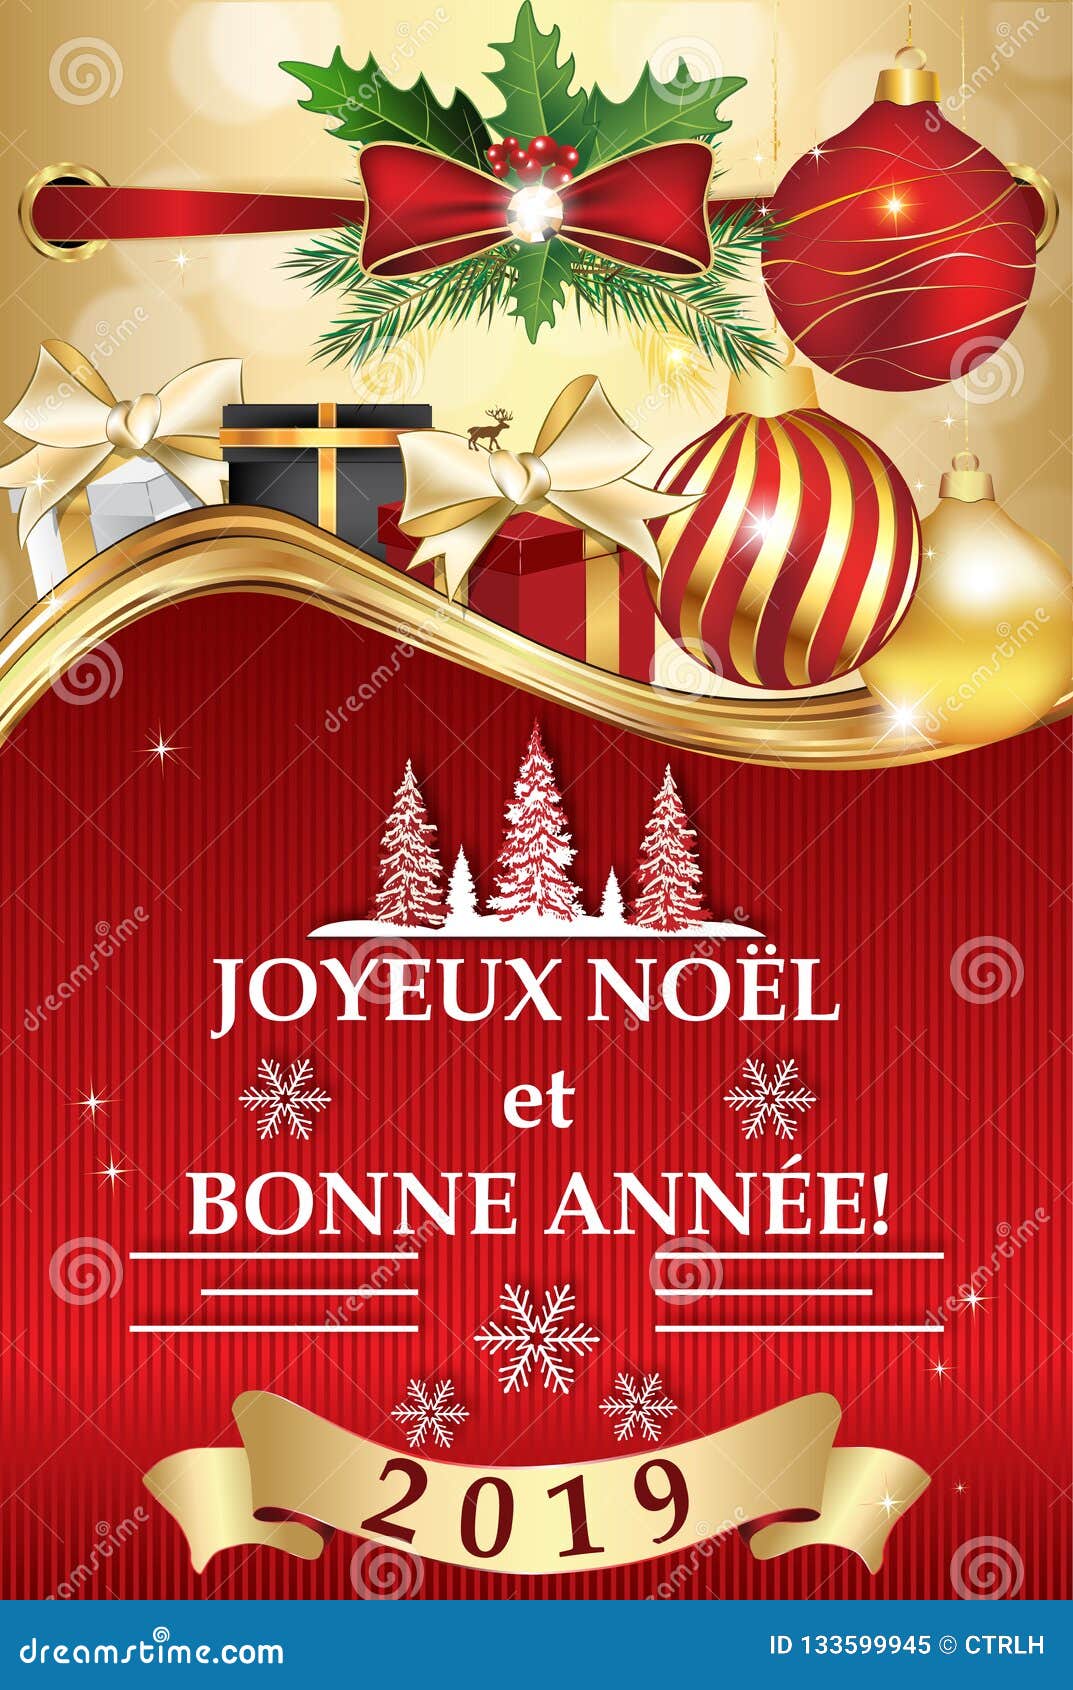 Merry Christmas and Happy New Year - Classic French Greeting Card ...